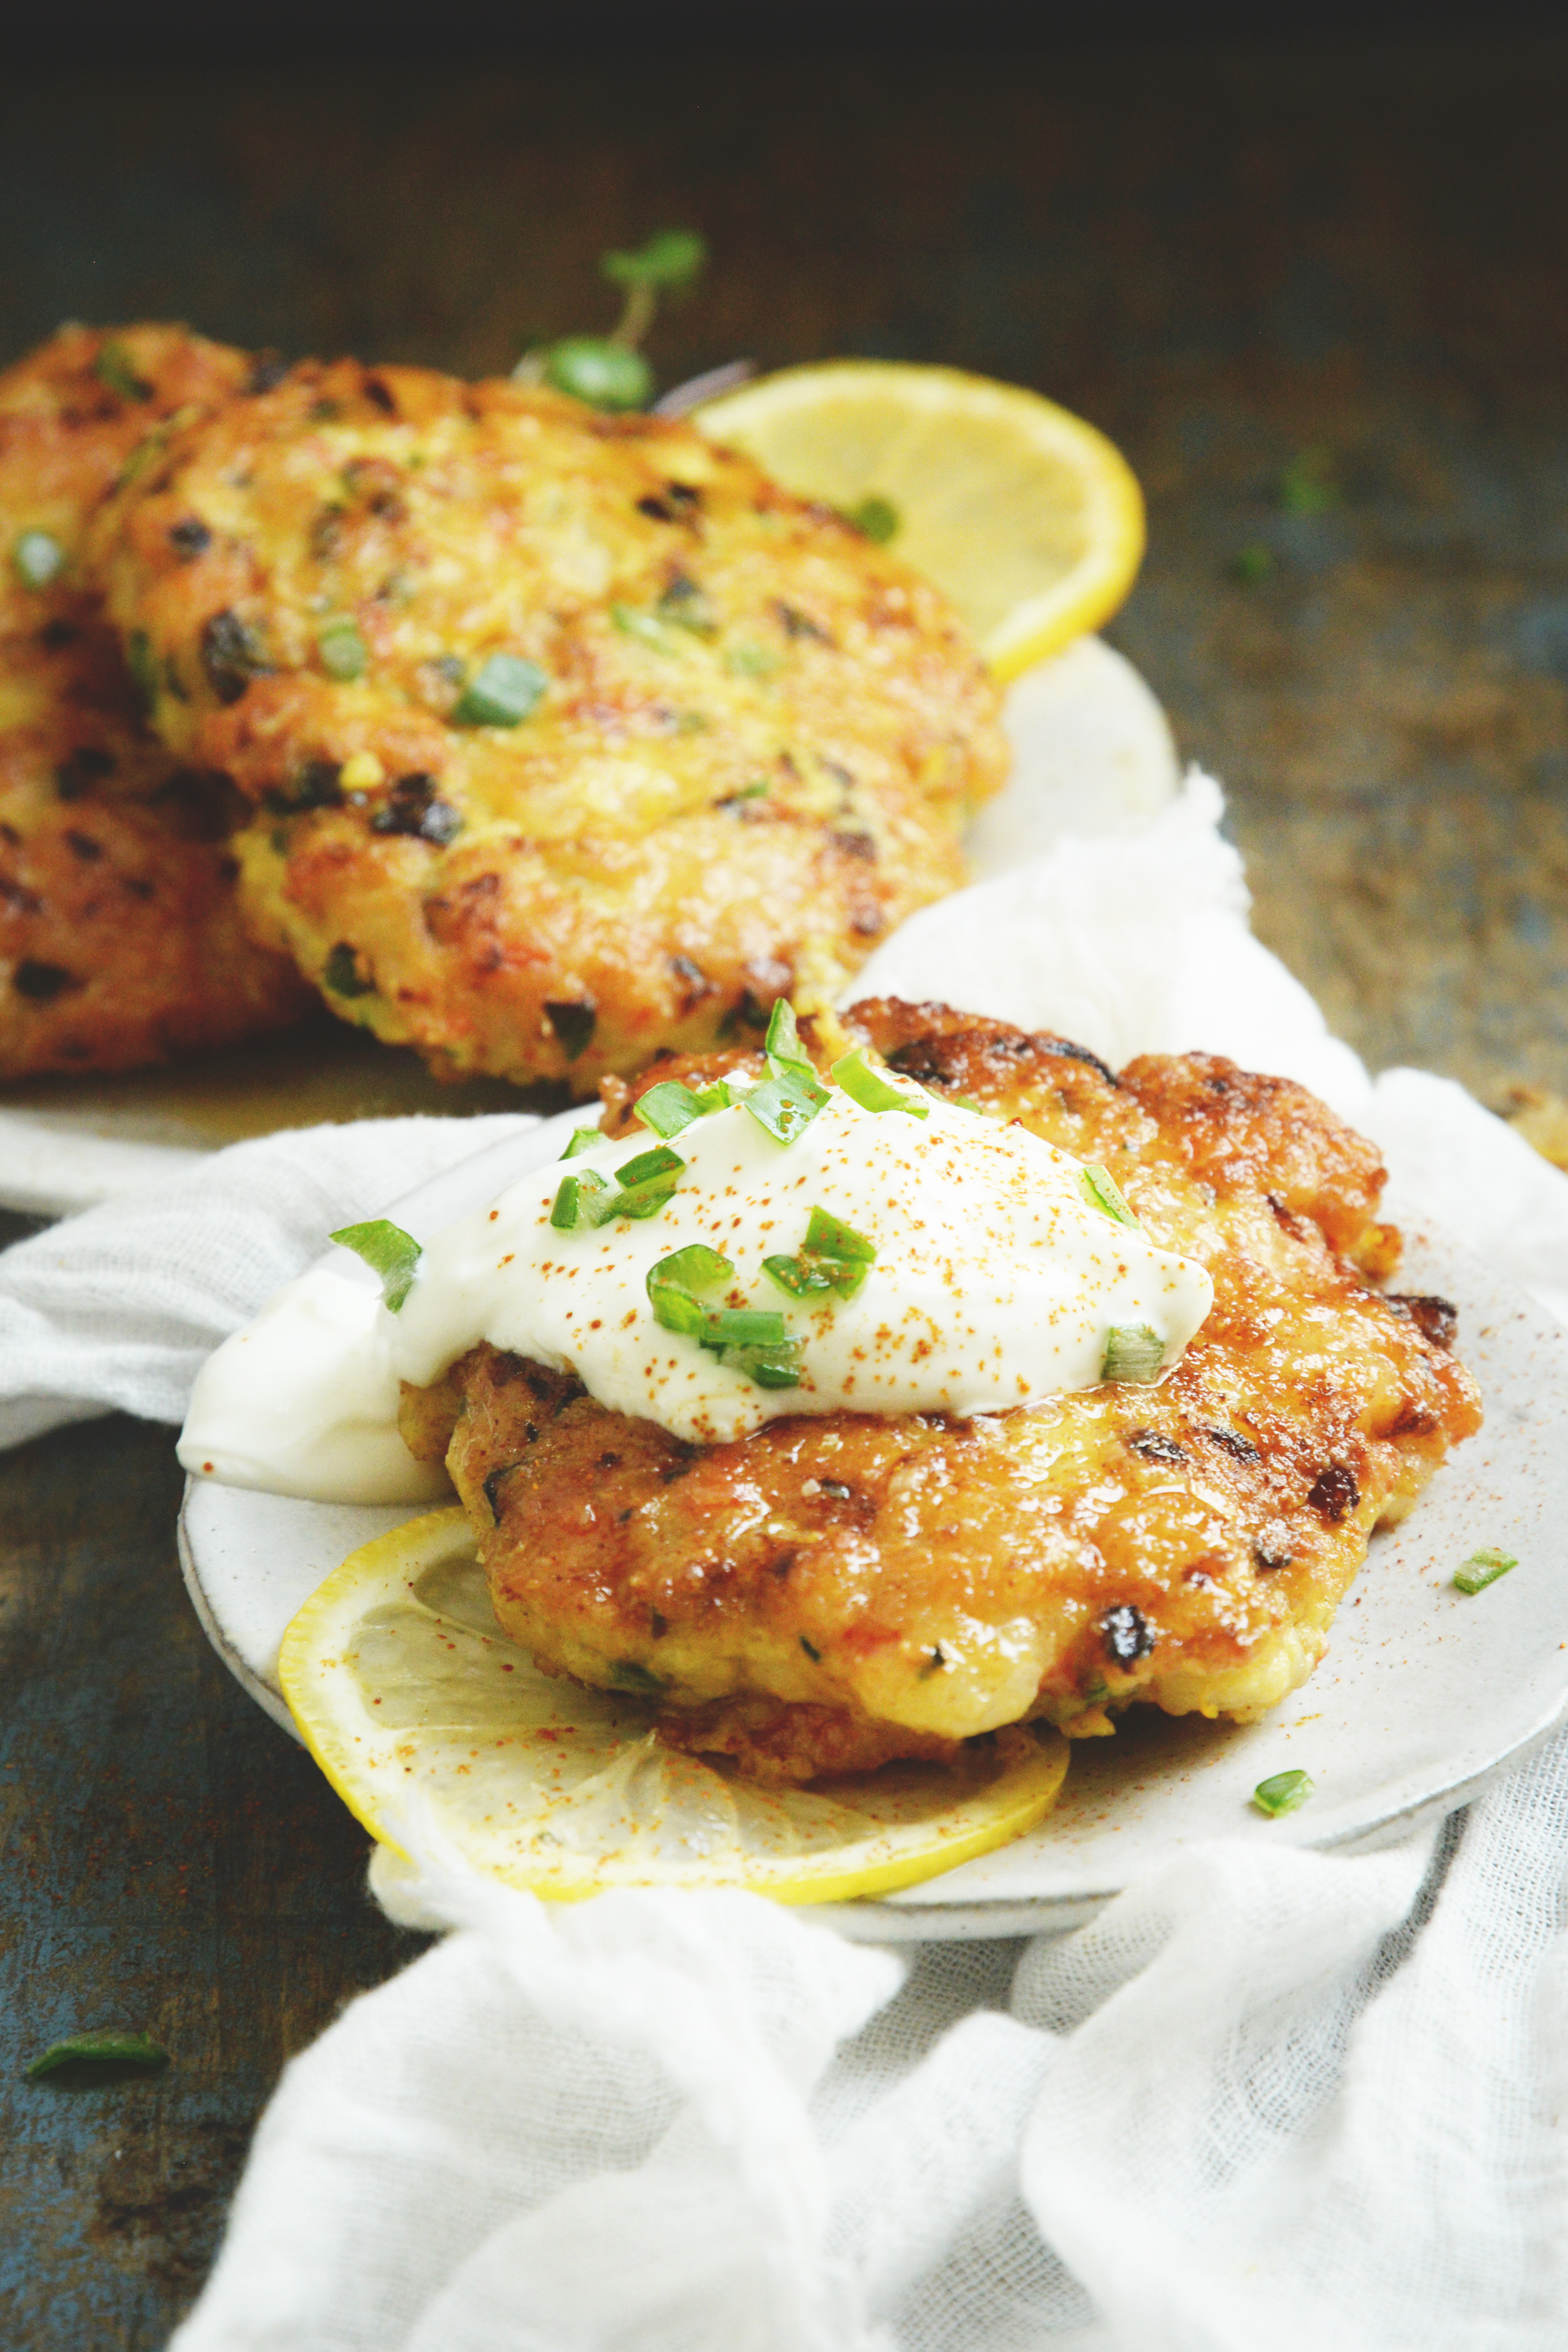 Shrimp Cakes Recipe-low-carb and keto-friendly-garnished with sour cream and green onions.